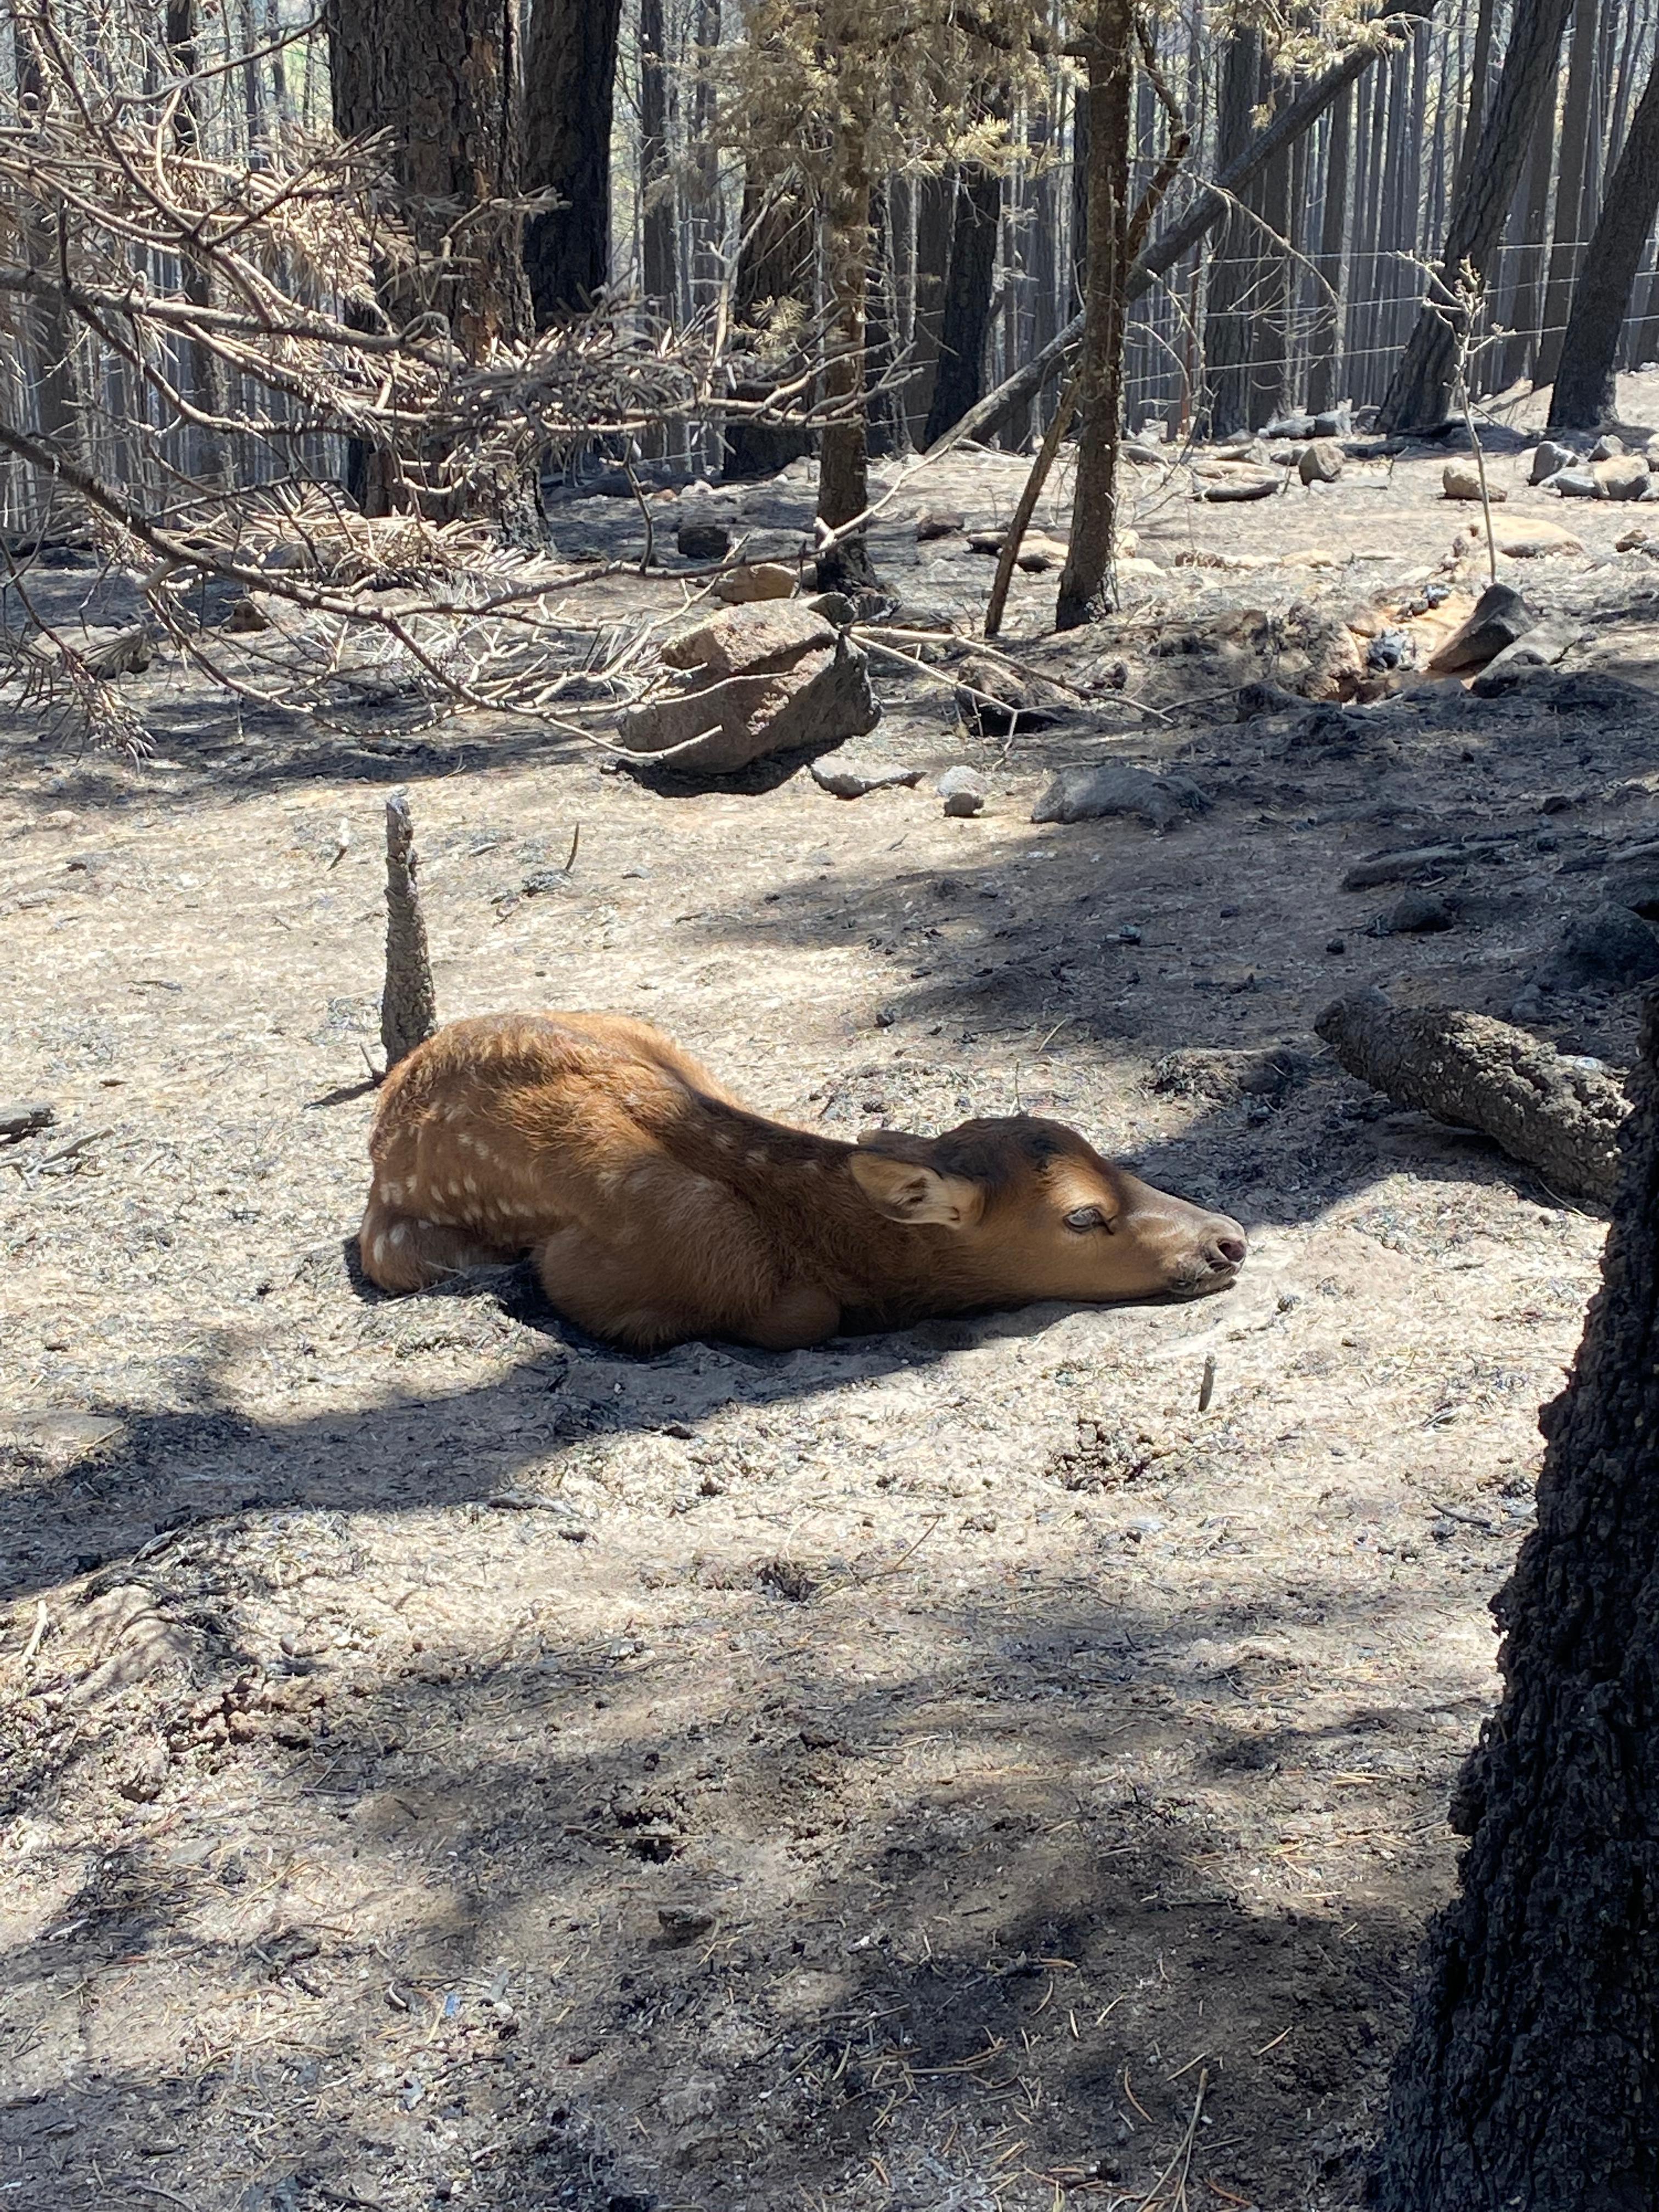 An elk calf lies in a burned-out forest